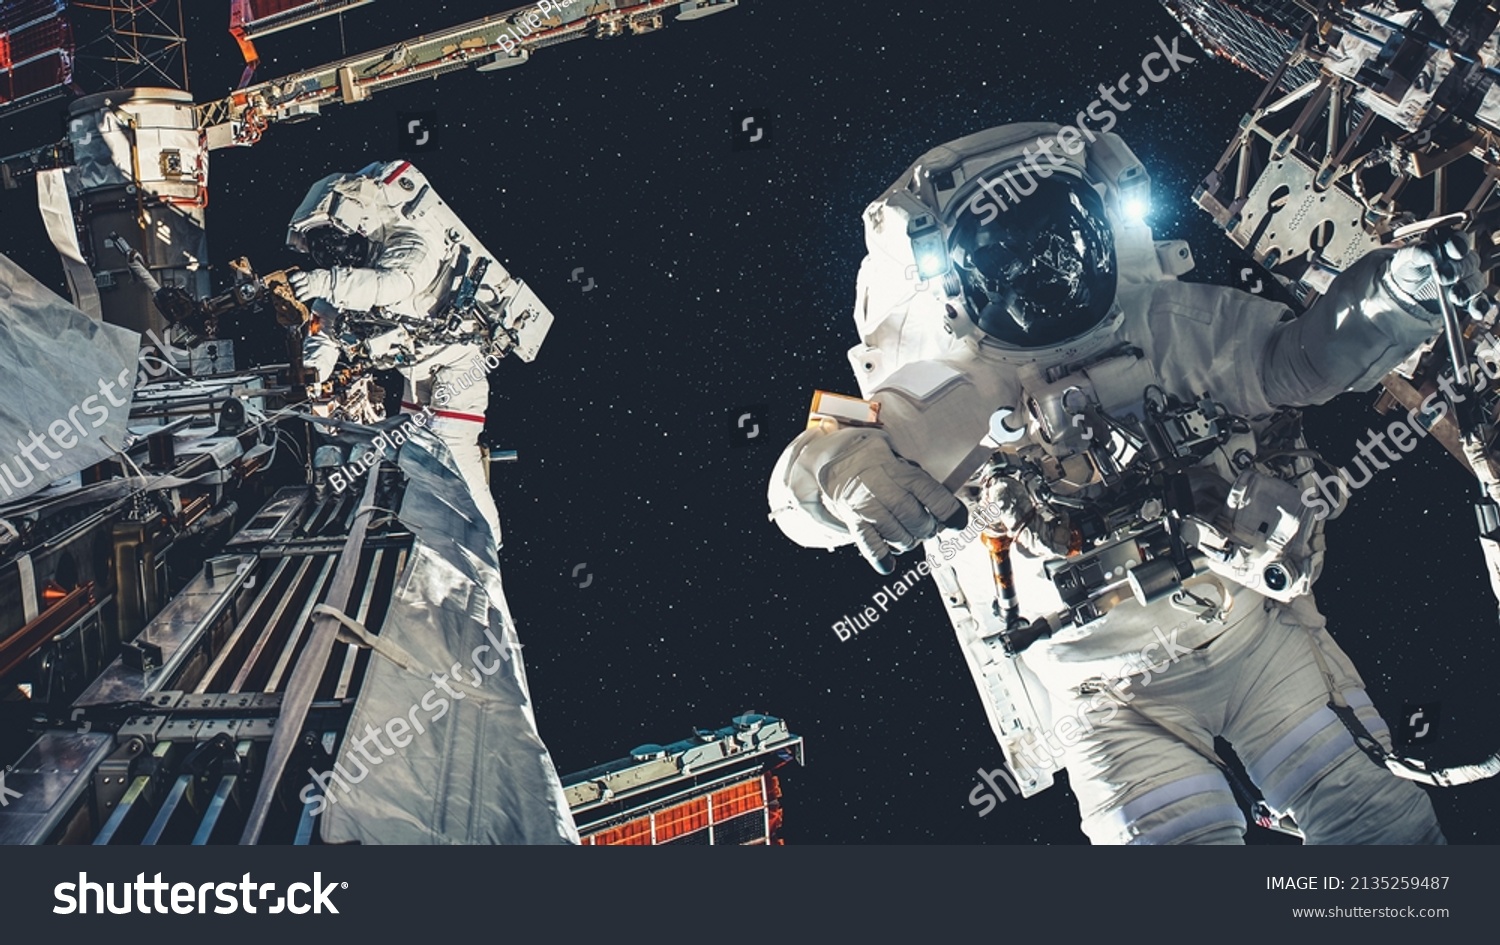 Astronaut spaceman do spacewalk while working for spaceflight mission at space station . Astronaut wear full spacesuit for operation . Elements of this image furnished by NASA space astronaut photos . #2135259487